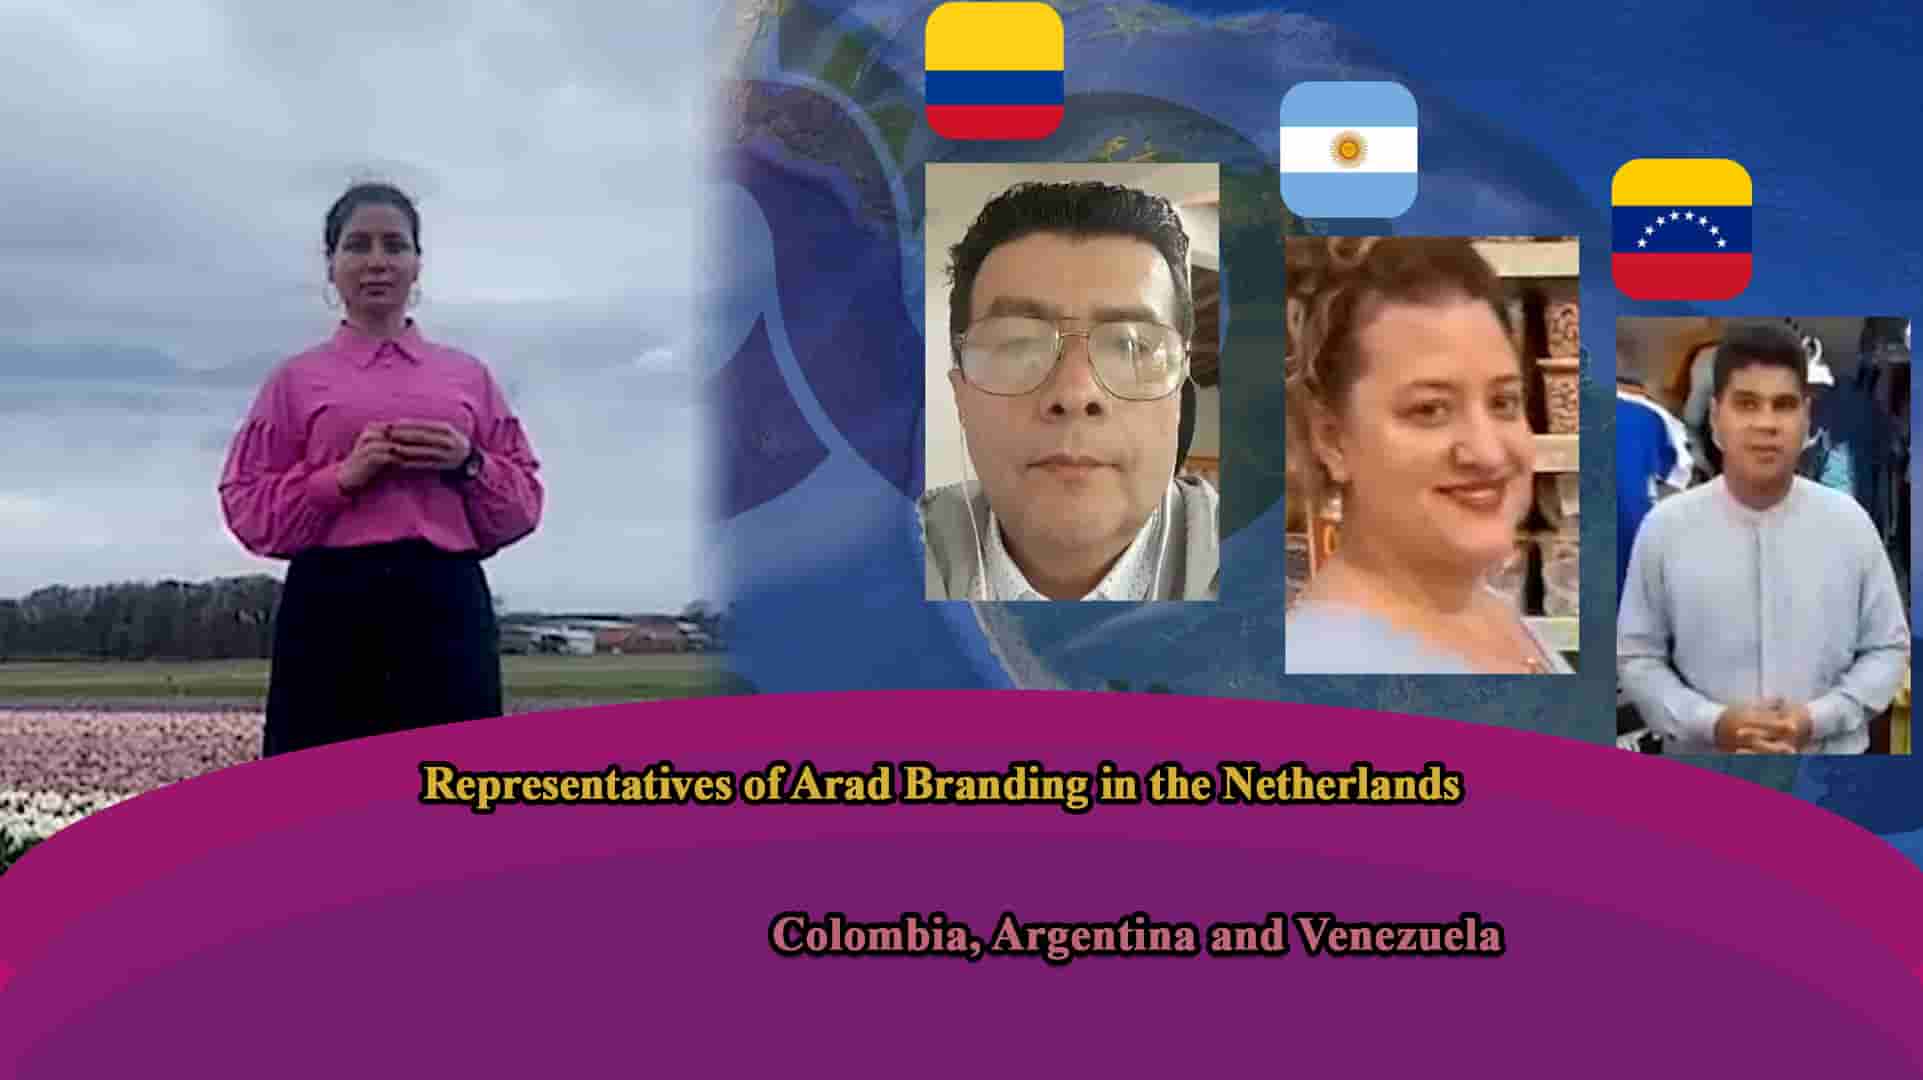 Activities of Arad Branding representatives in the Americas and Europe (Netherlands, Argentina, Colombia and Venezuela)